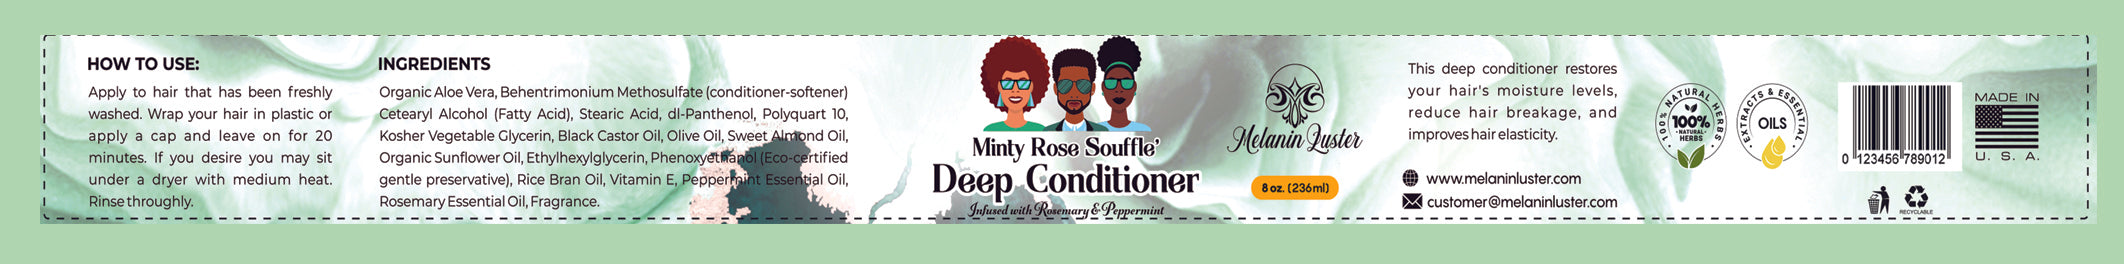 Minty Rose Souffle' Collection with Deep Conditioner